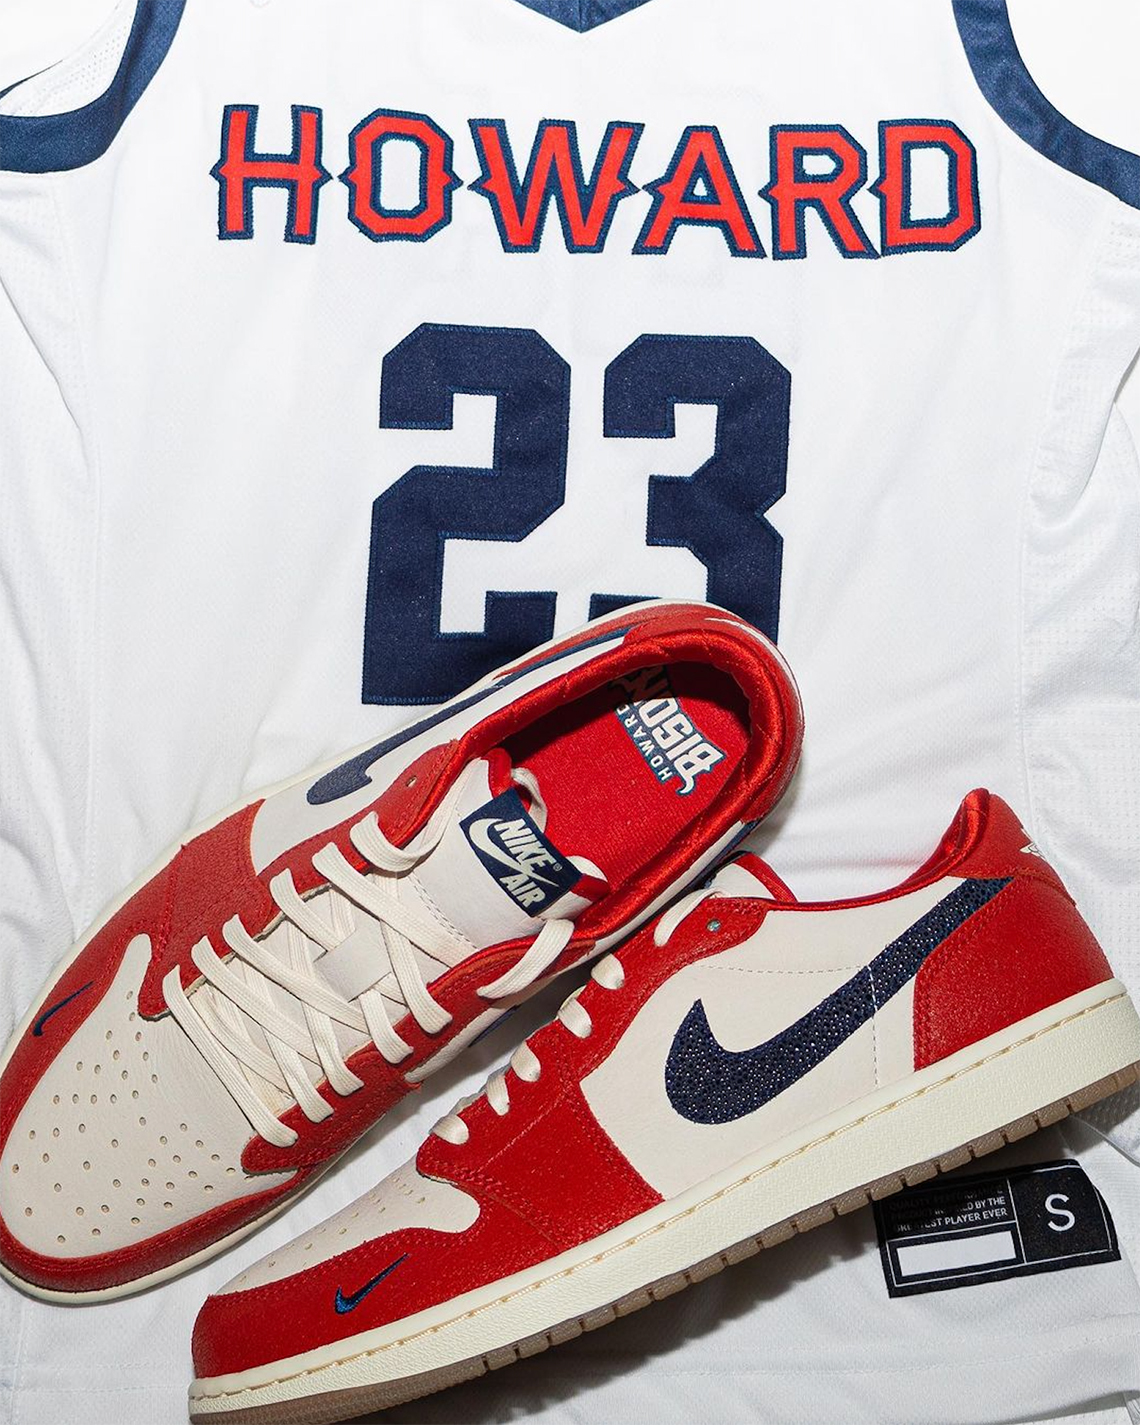 the air jordan 1 wings is limited to only 19400 pairs Og Howard University Pe 2